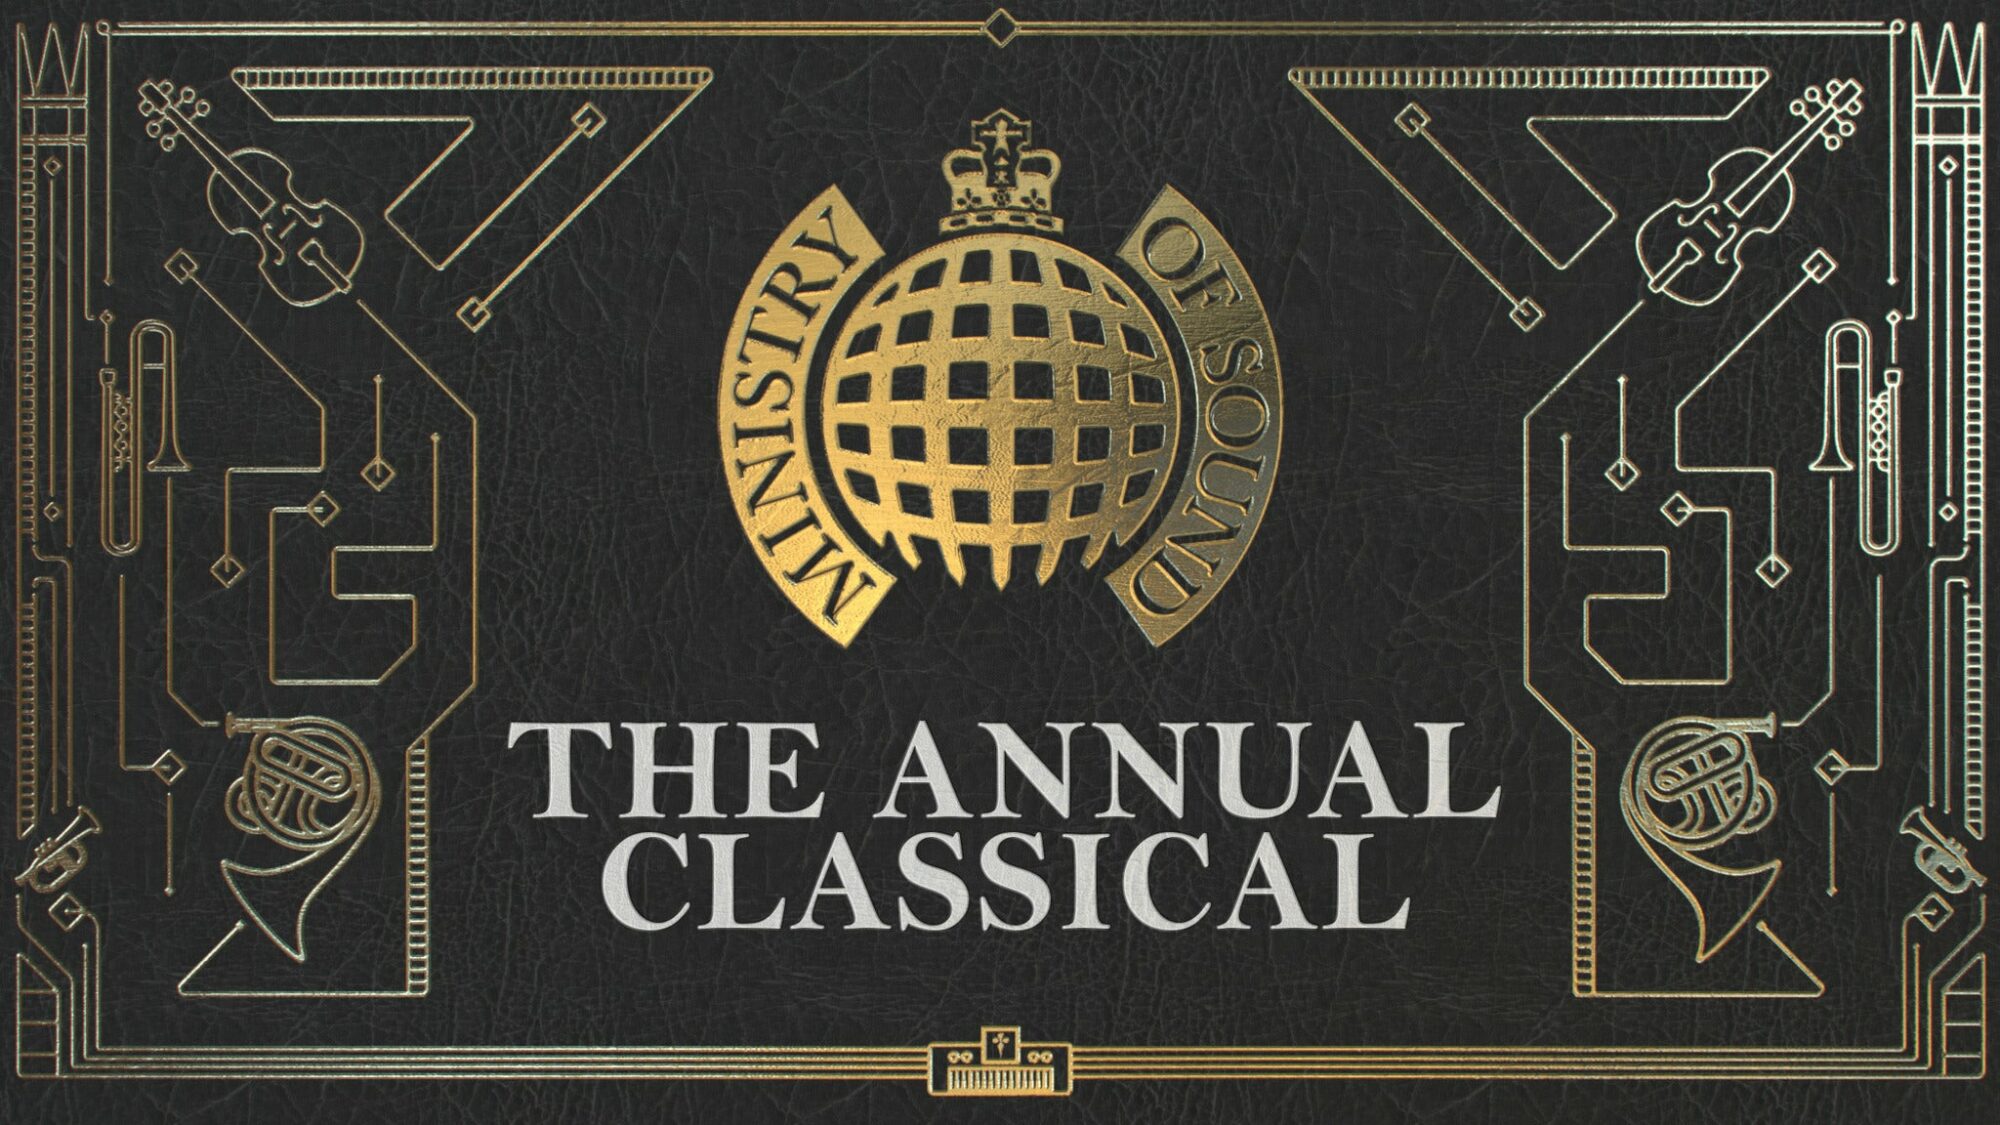 Image name Ministry of Sound Classical Ticket Hotel Packages at The Piece Hall the 7 image from the post Ministry of Sound Classical Ticket + Hotel Packages at The Piece Hall, Halifax in Yorkshire.com.